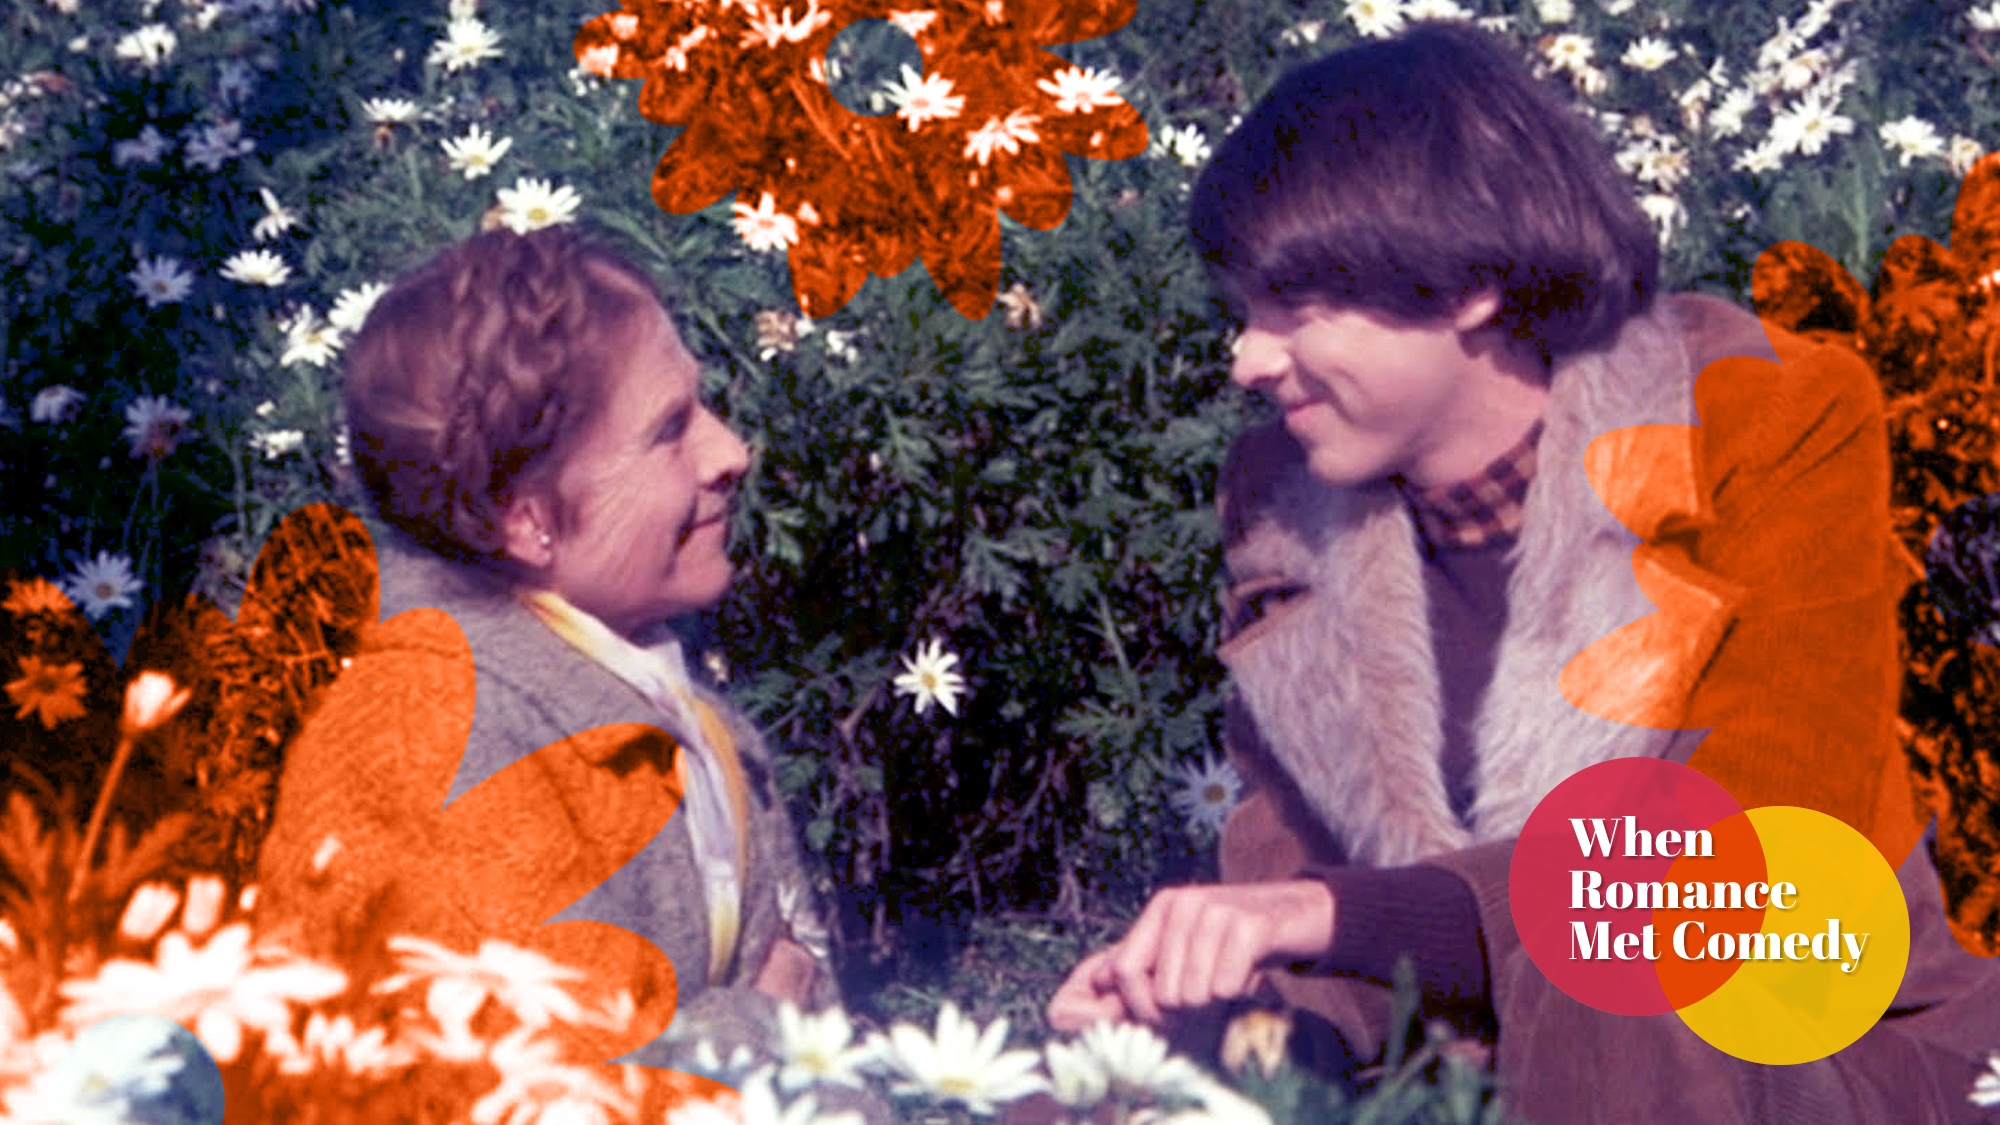 Hard to believe the world once hated Harold And Maude